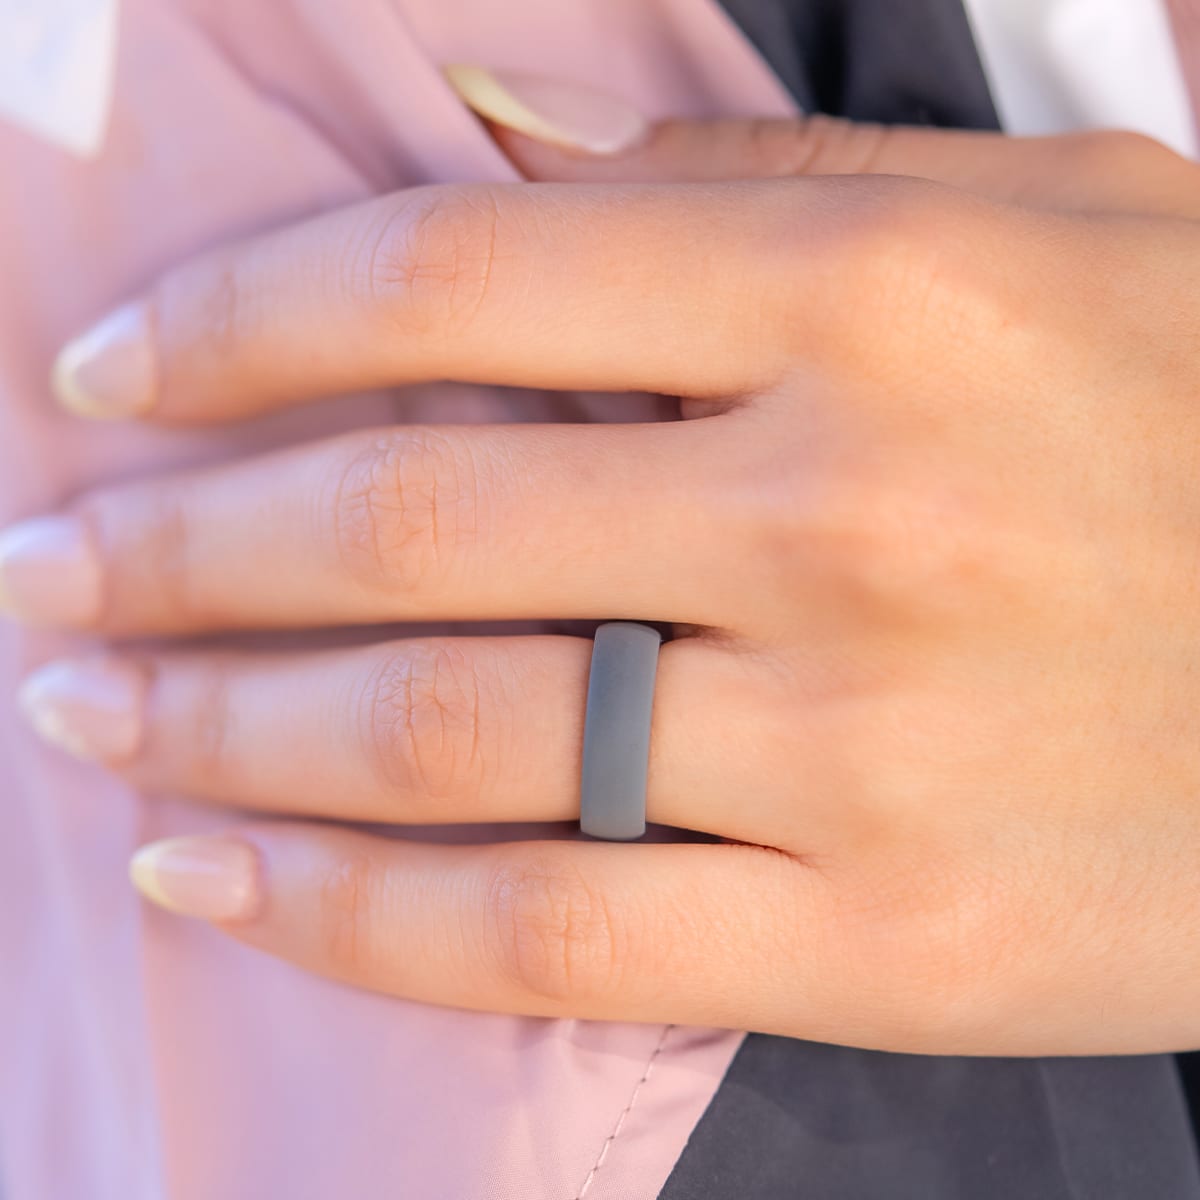 Gray silicone wedding band on a female hand